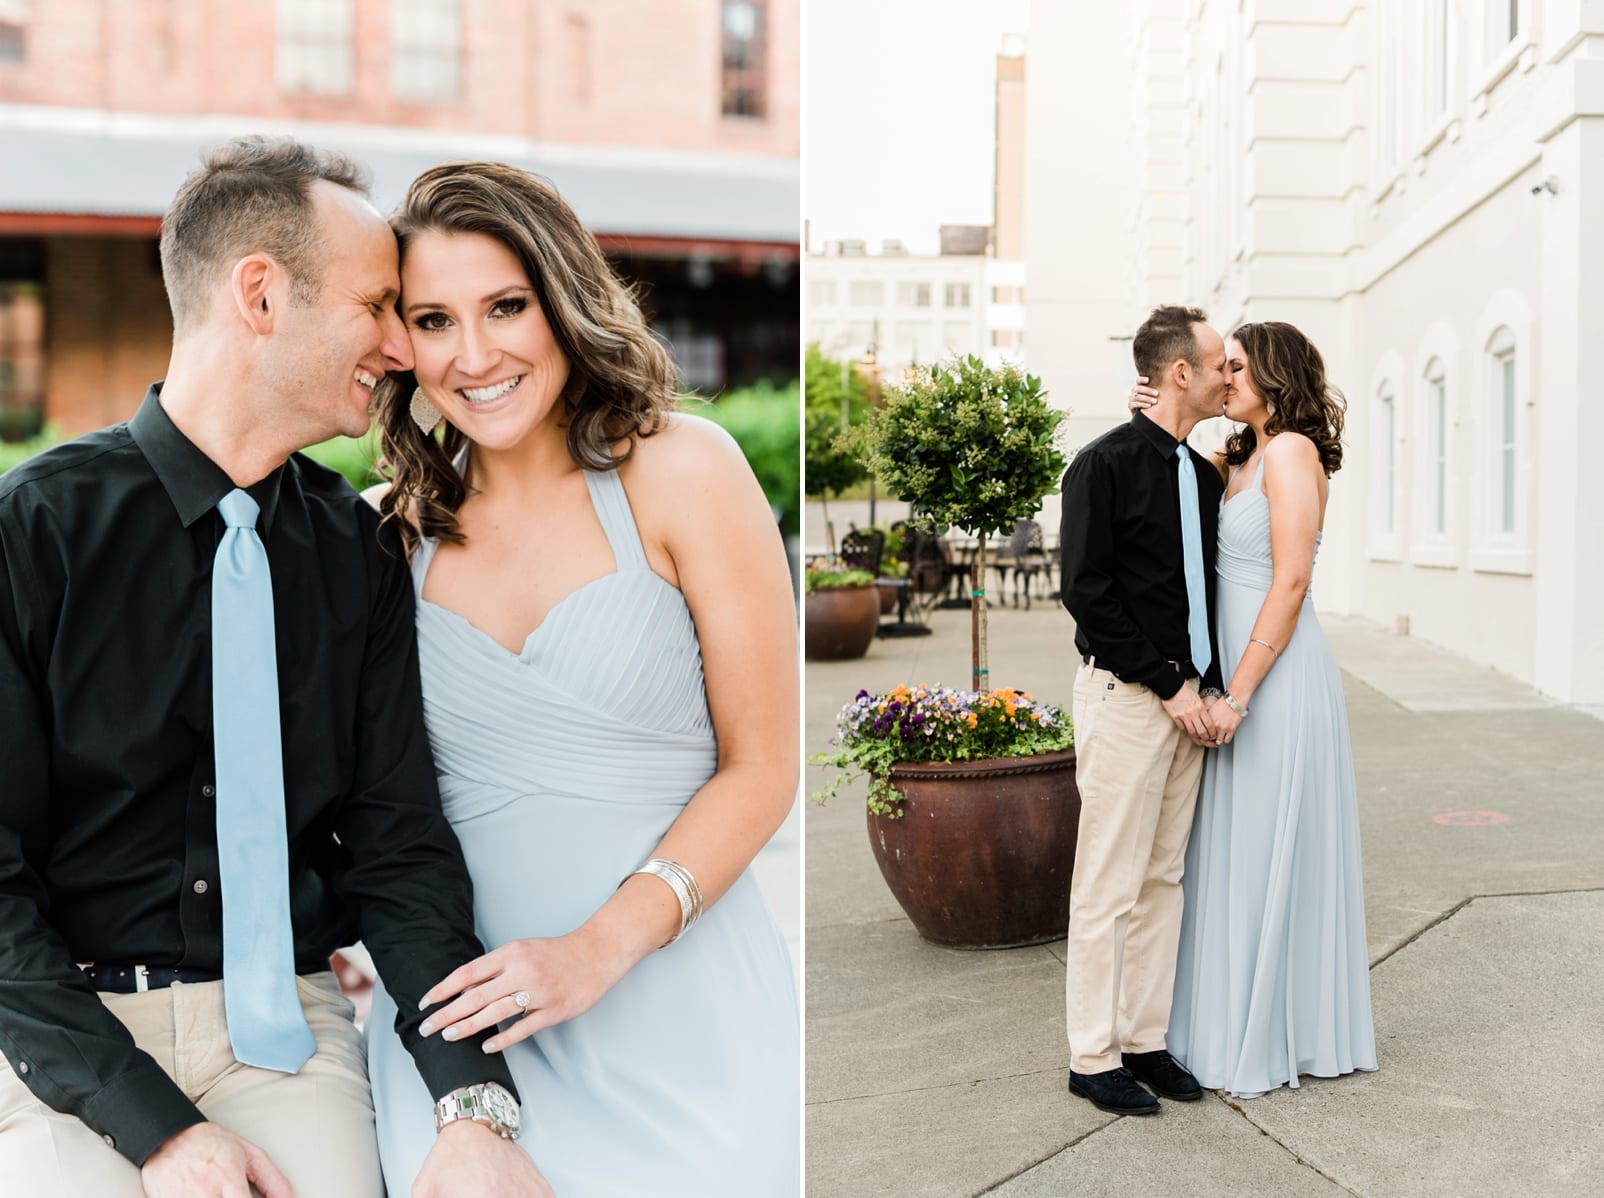 Durham couple embracing during their downtown engagement session photo